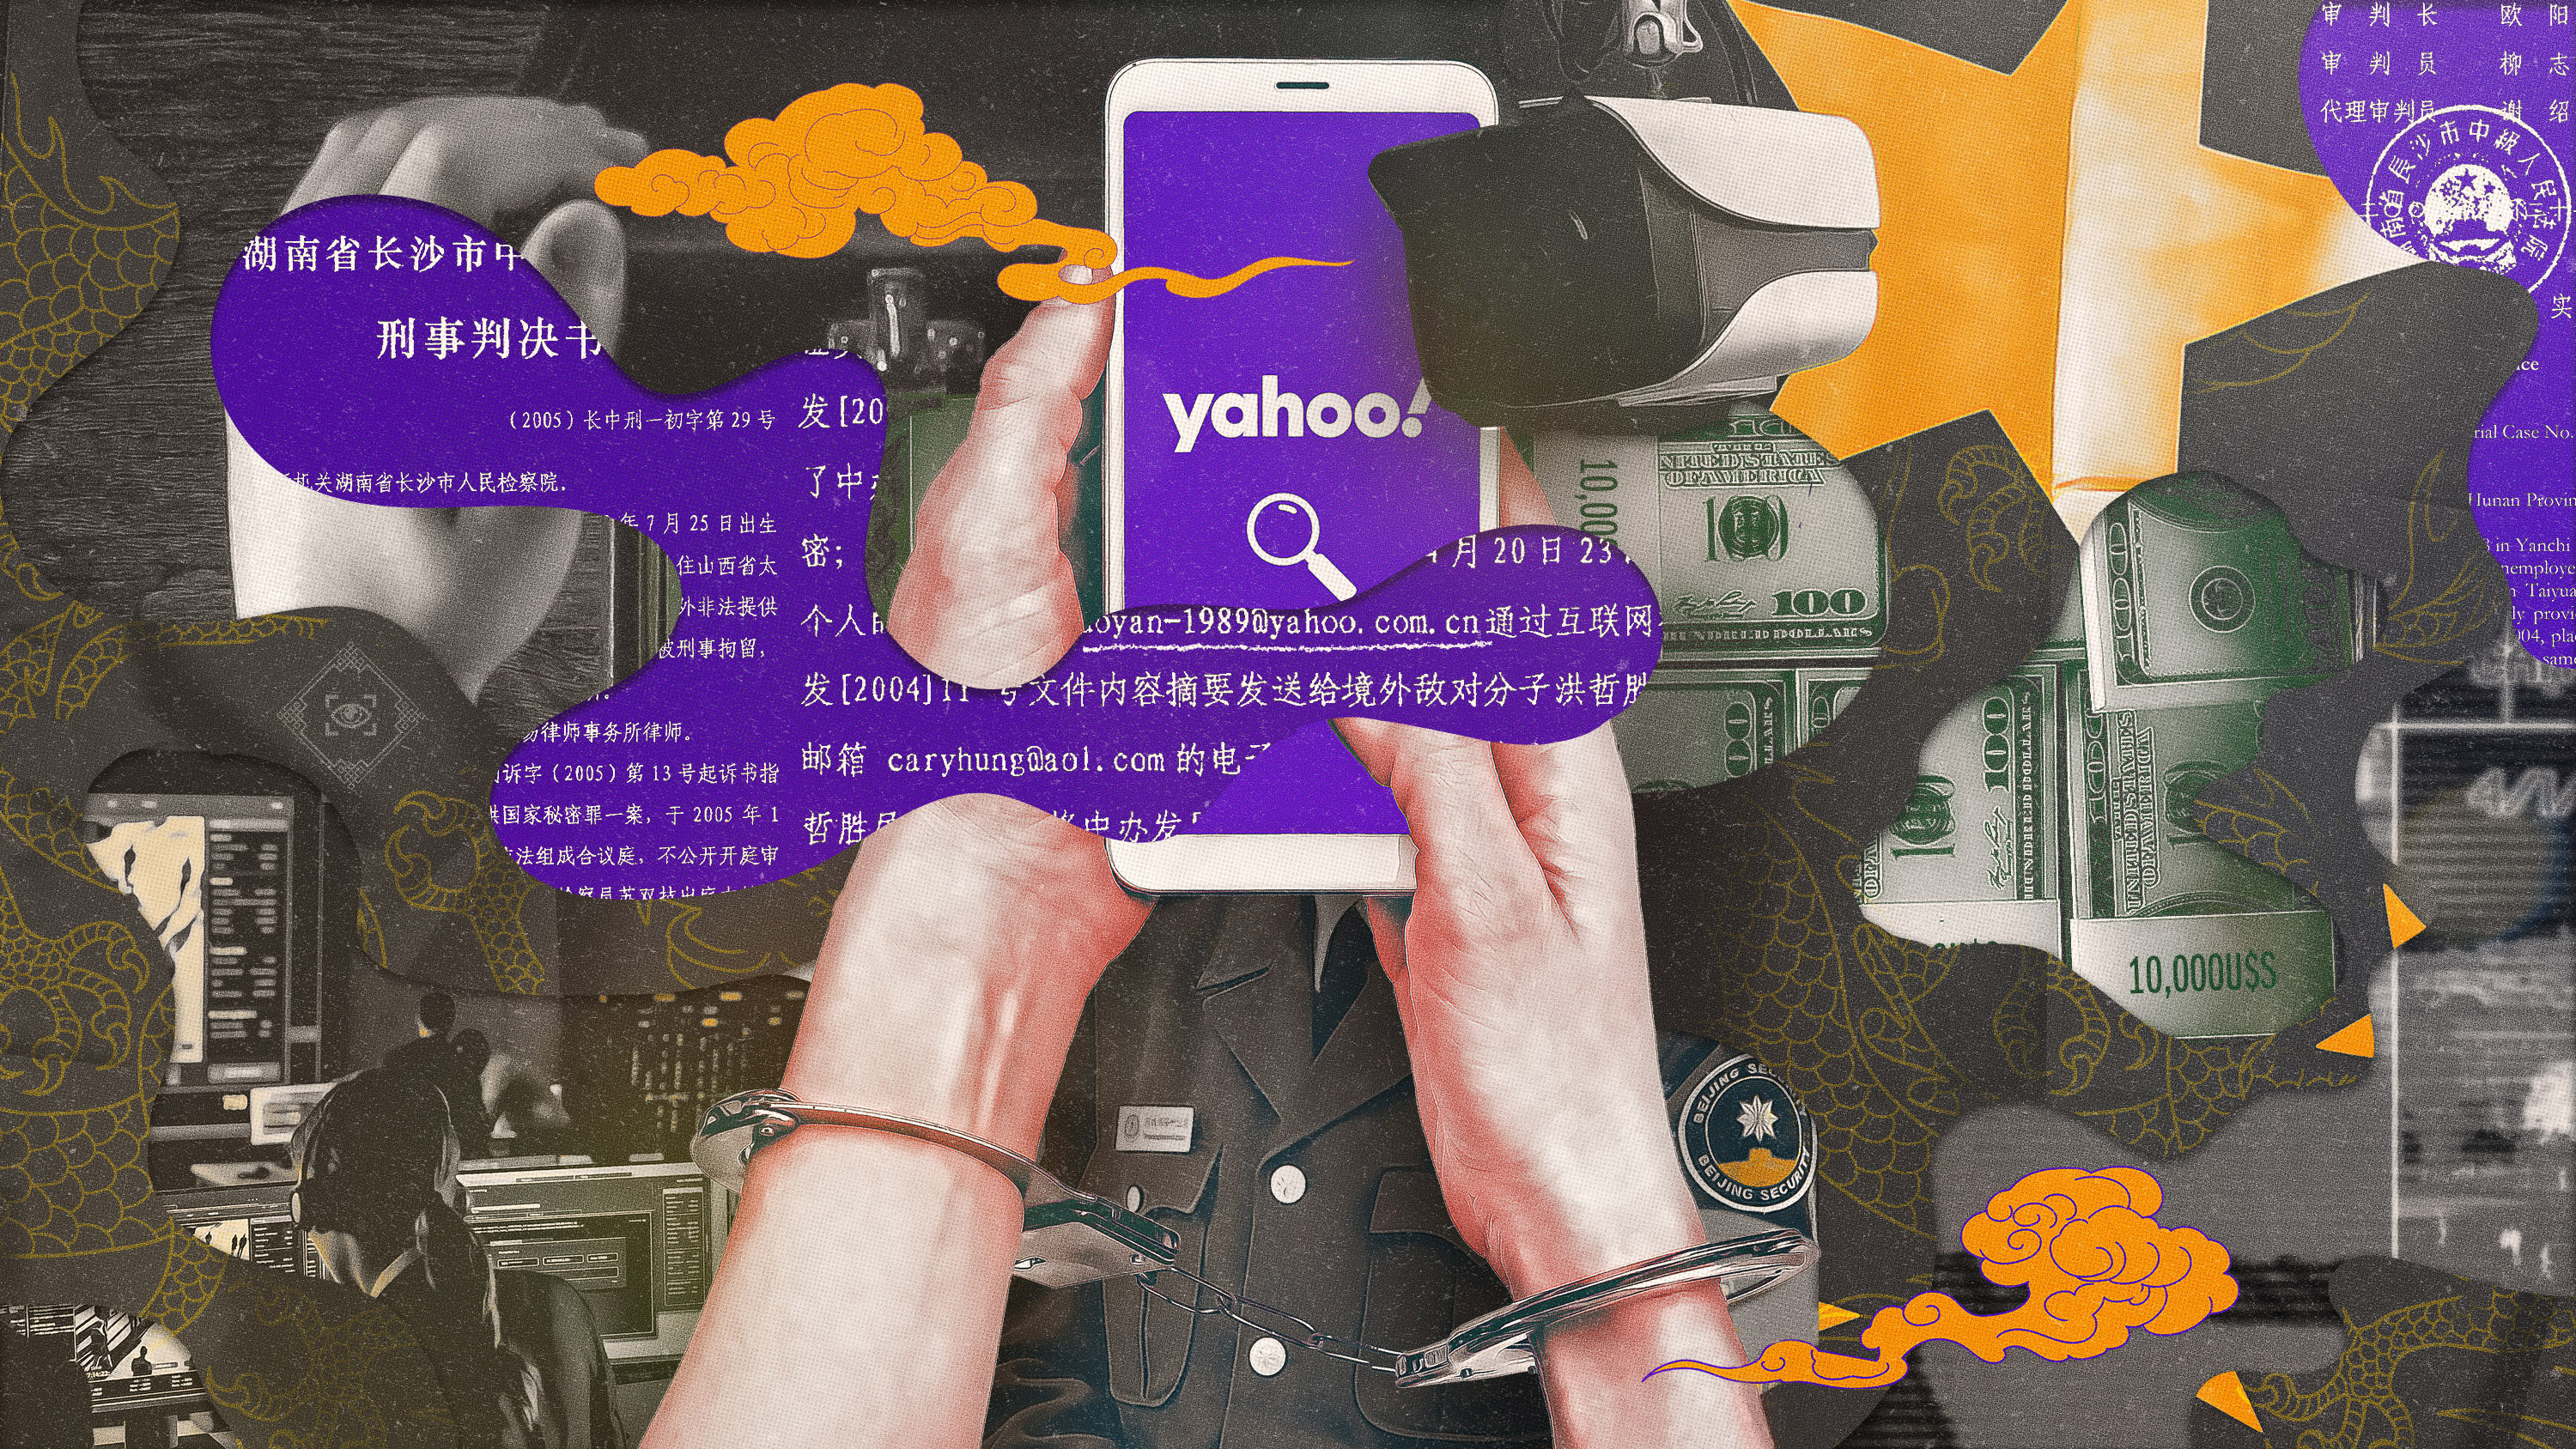 illustration of restrained hands viewing a device with Yahoo! logo amidst a jumble of shapes, US currency and surveillance tech